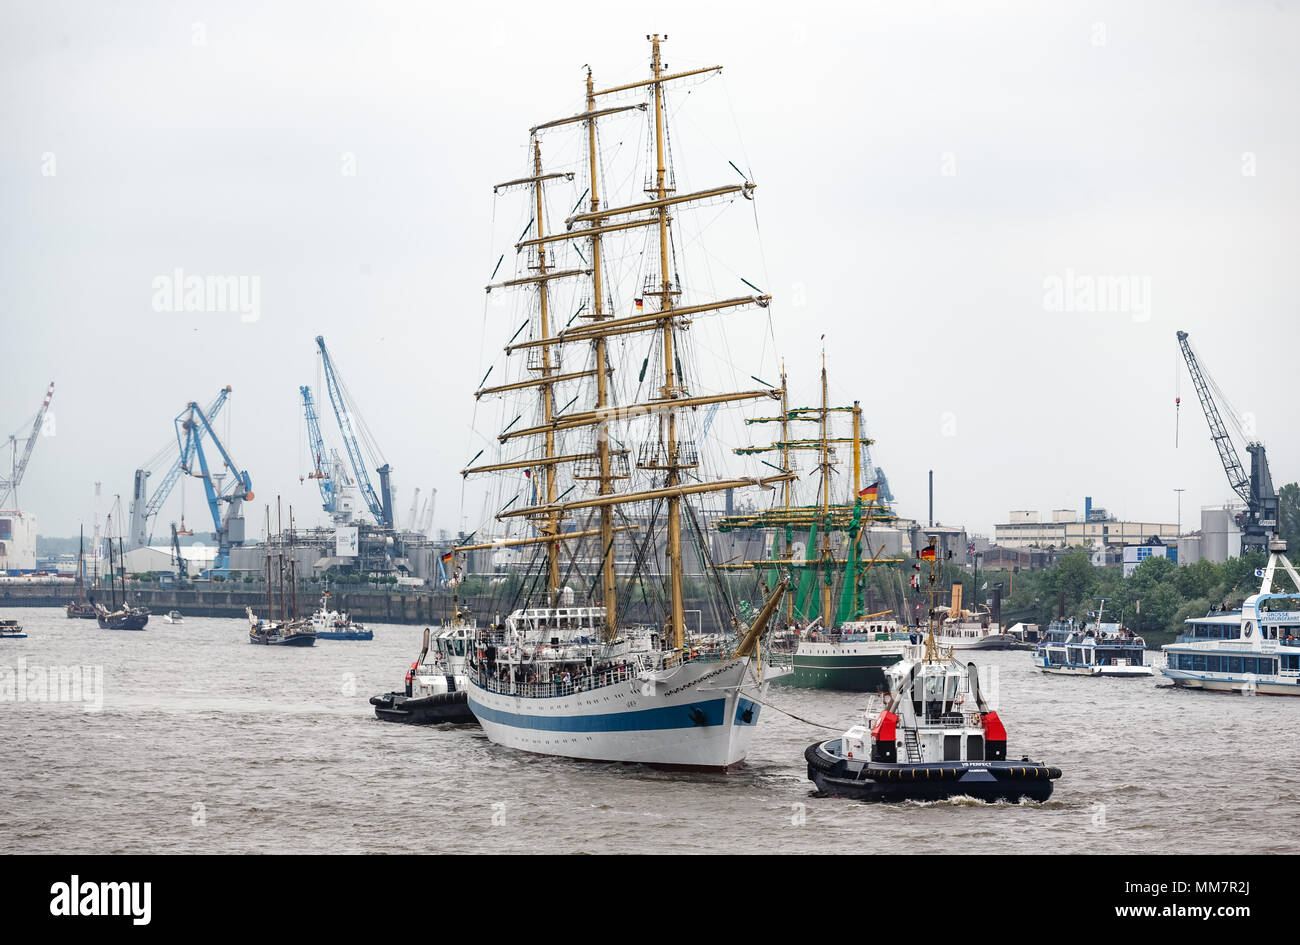 10 May 2018, Germany, Hamburg: Together with more than 100 ships of all sizes, the Russian tall ship parades on the River Elbe for the inauguration of the anniversary of Hamburg's Harbour. Approximately one million visitors are expected to attend the largest Harbour festivity in the world. The festivities will end on 13 May 2018 with a large outlet parade. Photo: Markus Scholz/dpa Stock Photo